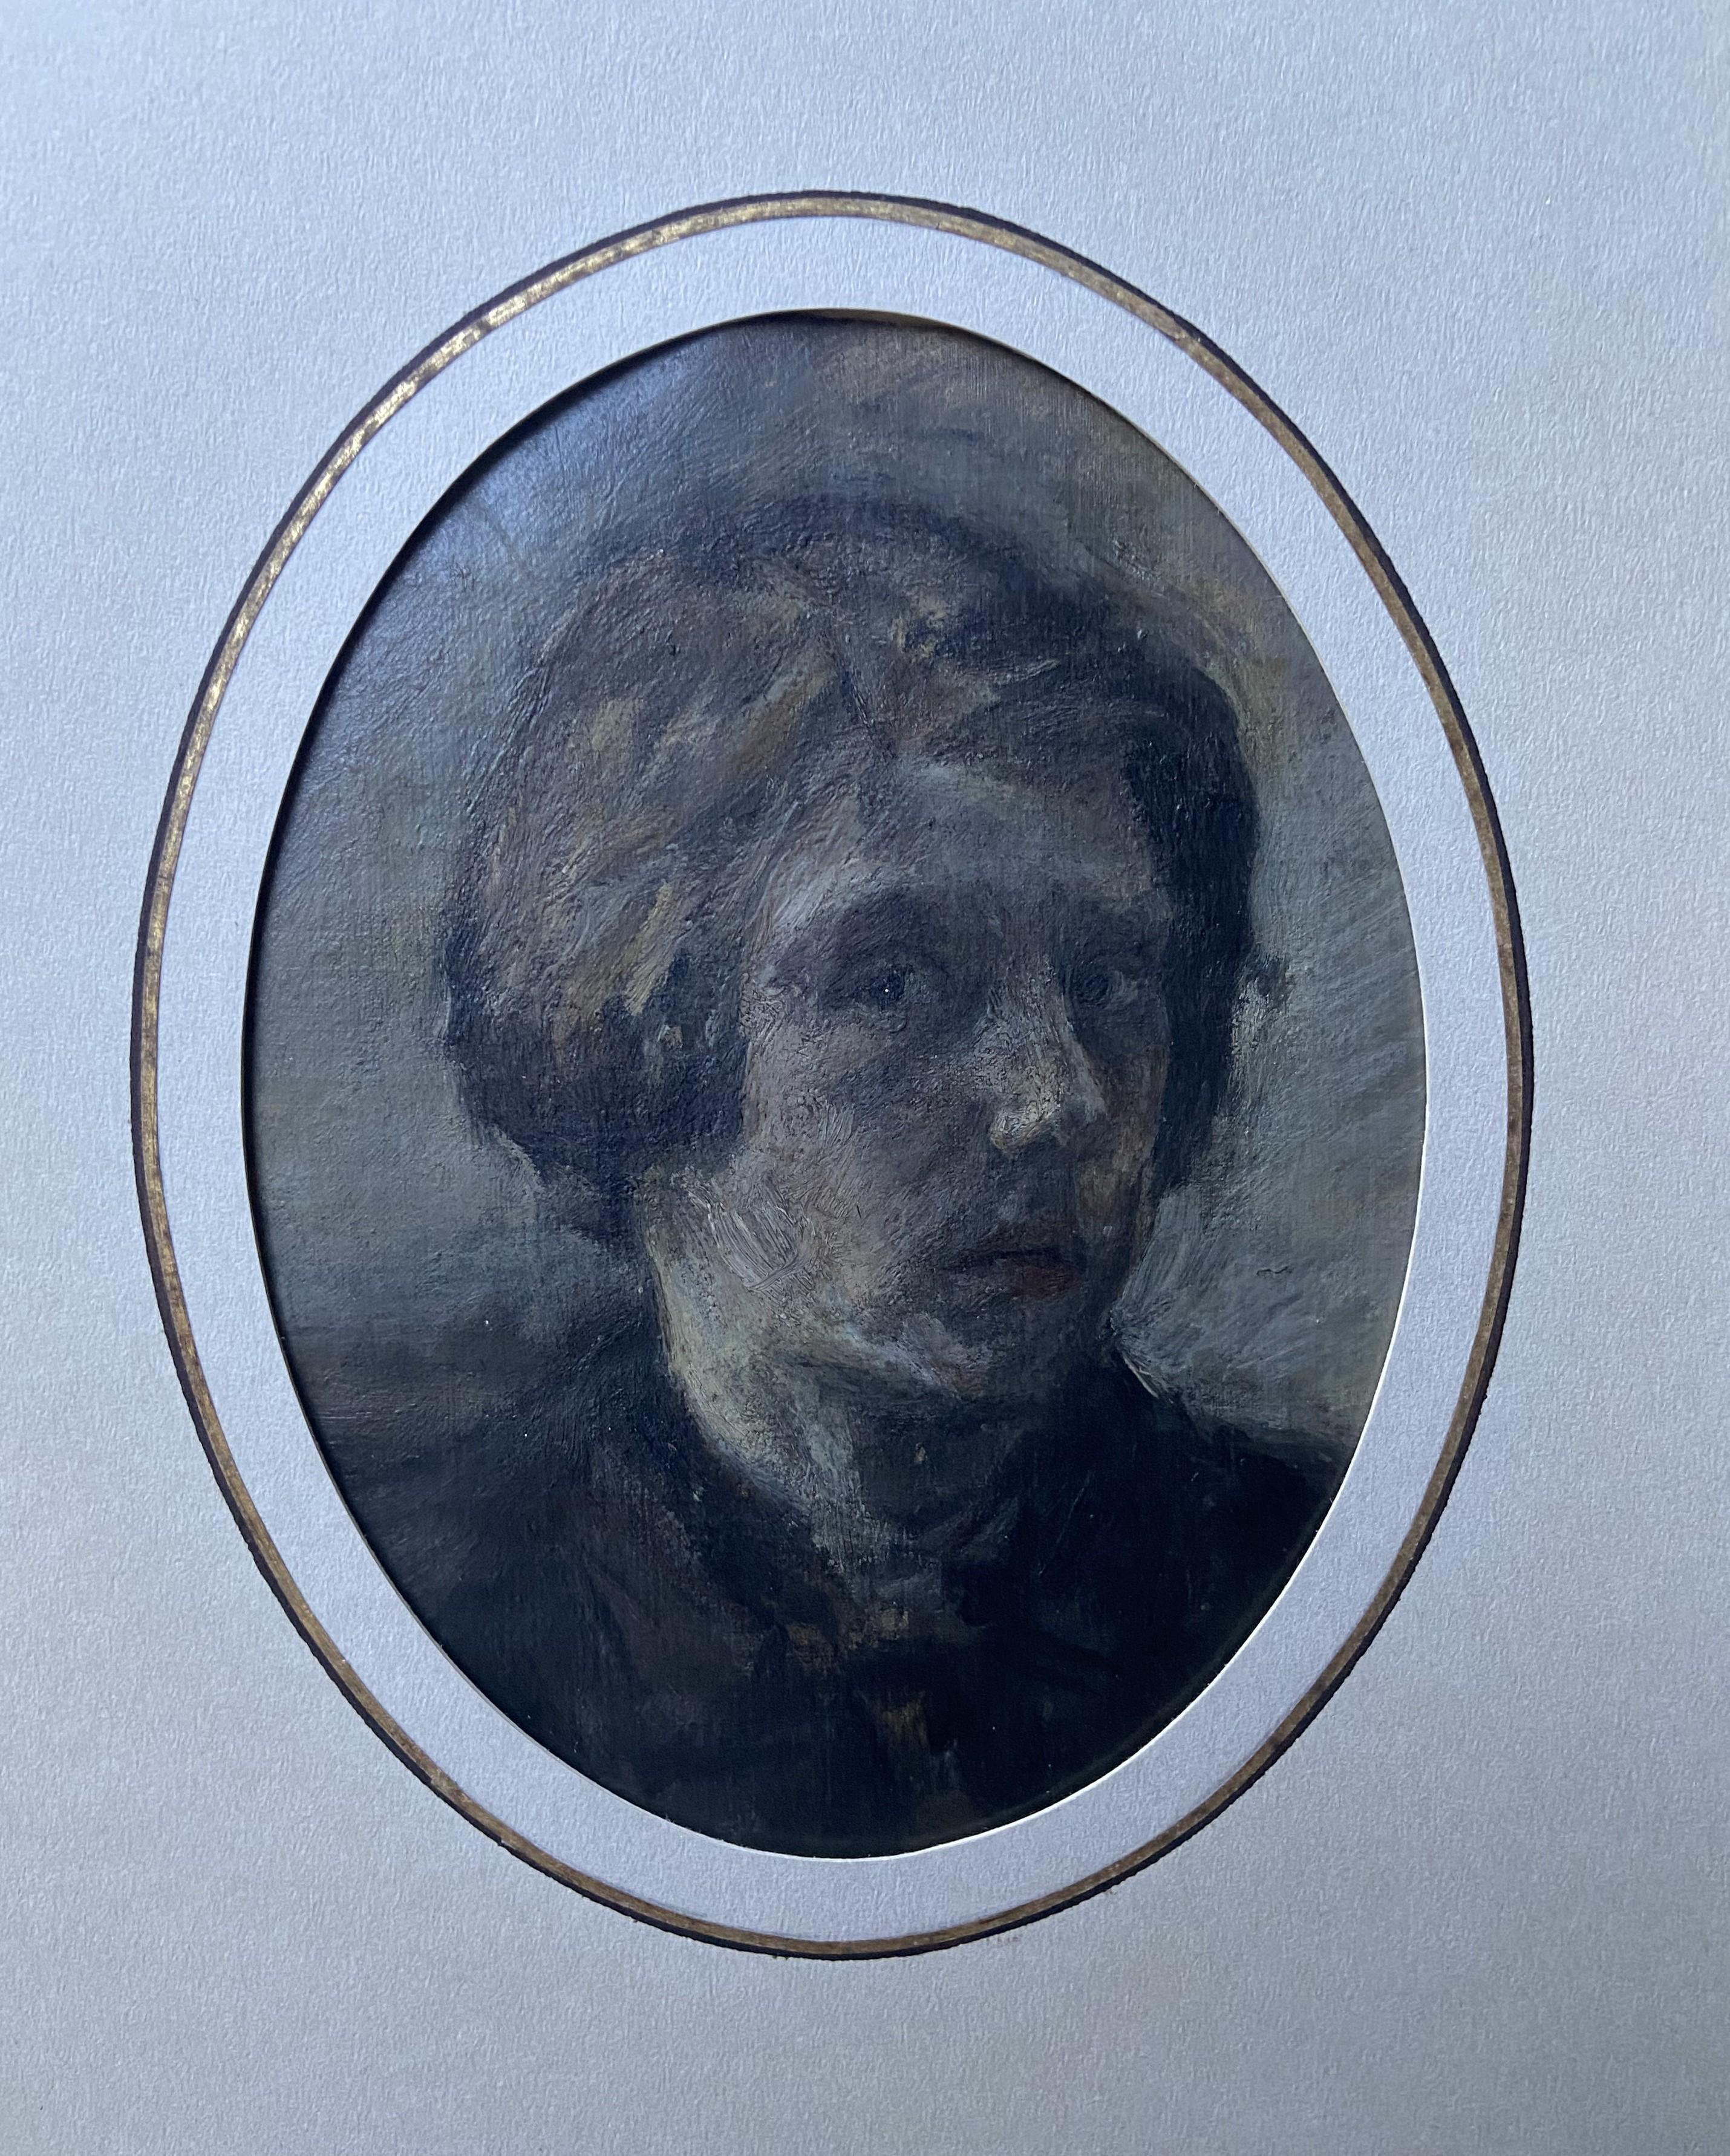 French Romantic School, 19th Century
Portrait of a man, a selfportrait ?
oil on paper
17.5 x 12 cm oval
Framed under glass : 43 x 34.5 cm

This rather mysterious portrait is perhaps a self-portrait of the artist who painted it. This is suggested by